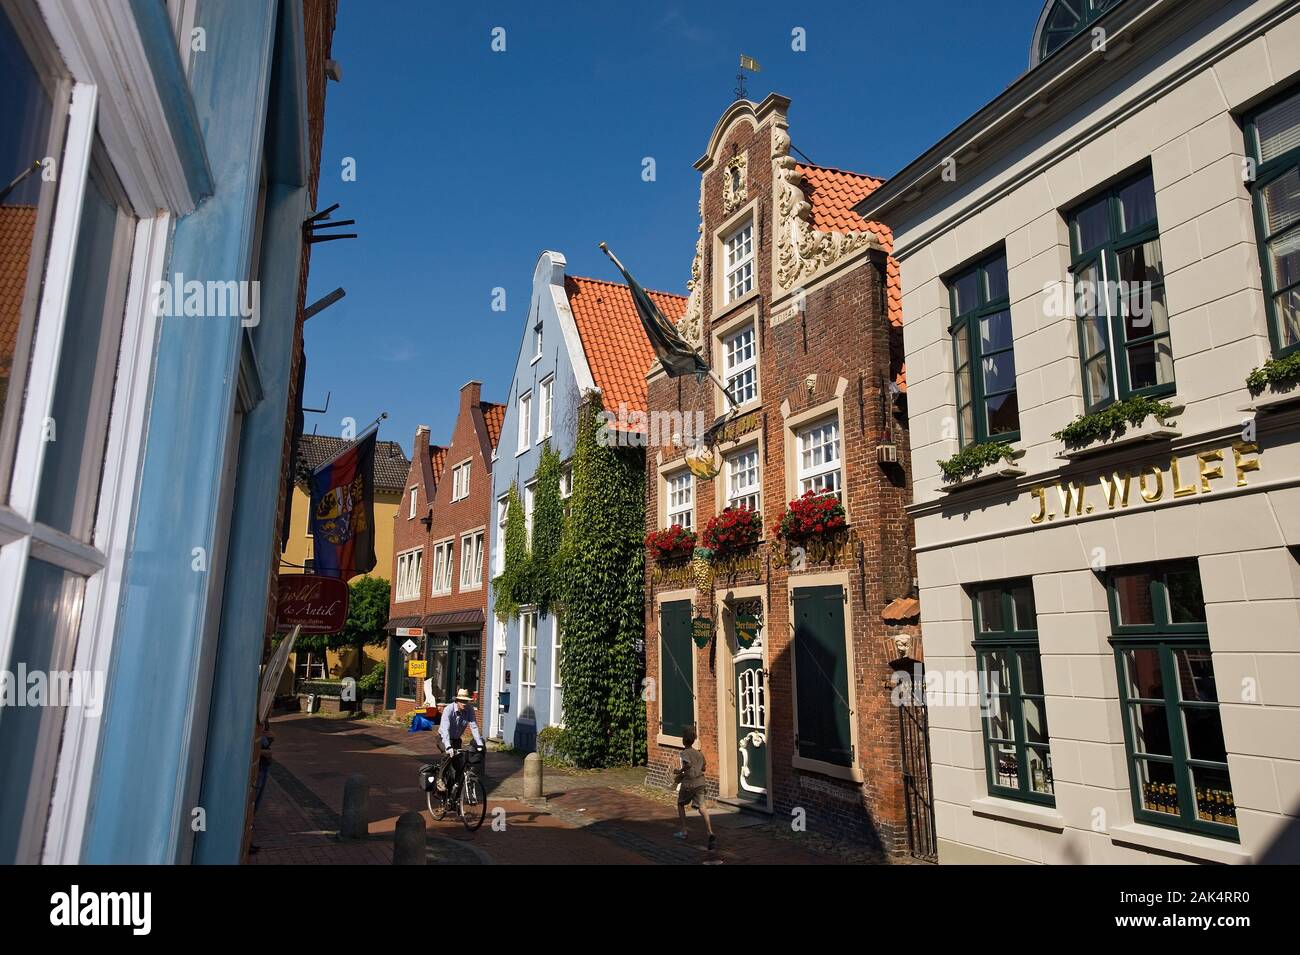 Page 2 - Leer In Ostfriesland High Resolution Stock Photography and Images  - Alamy